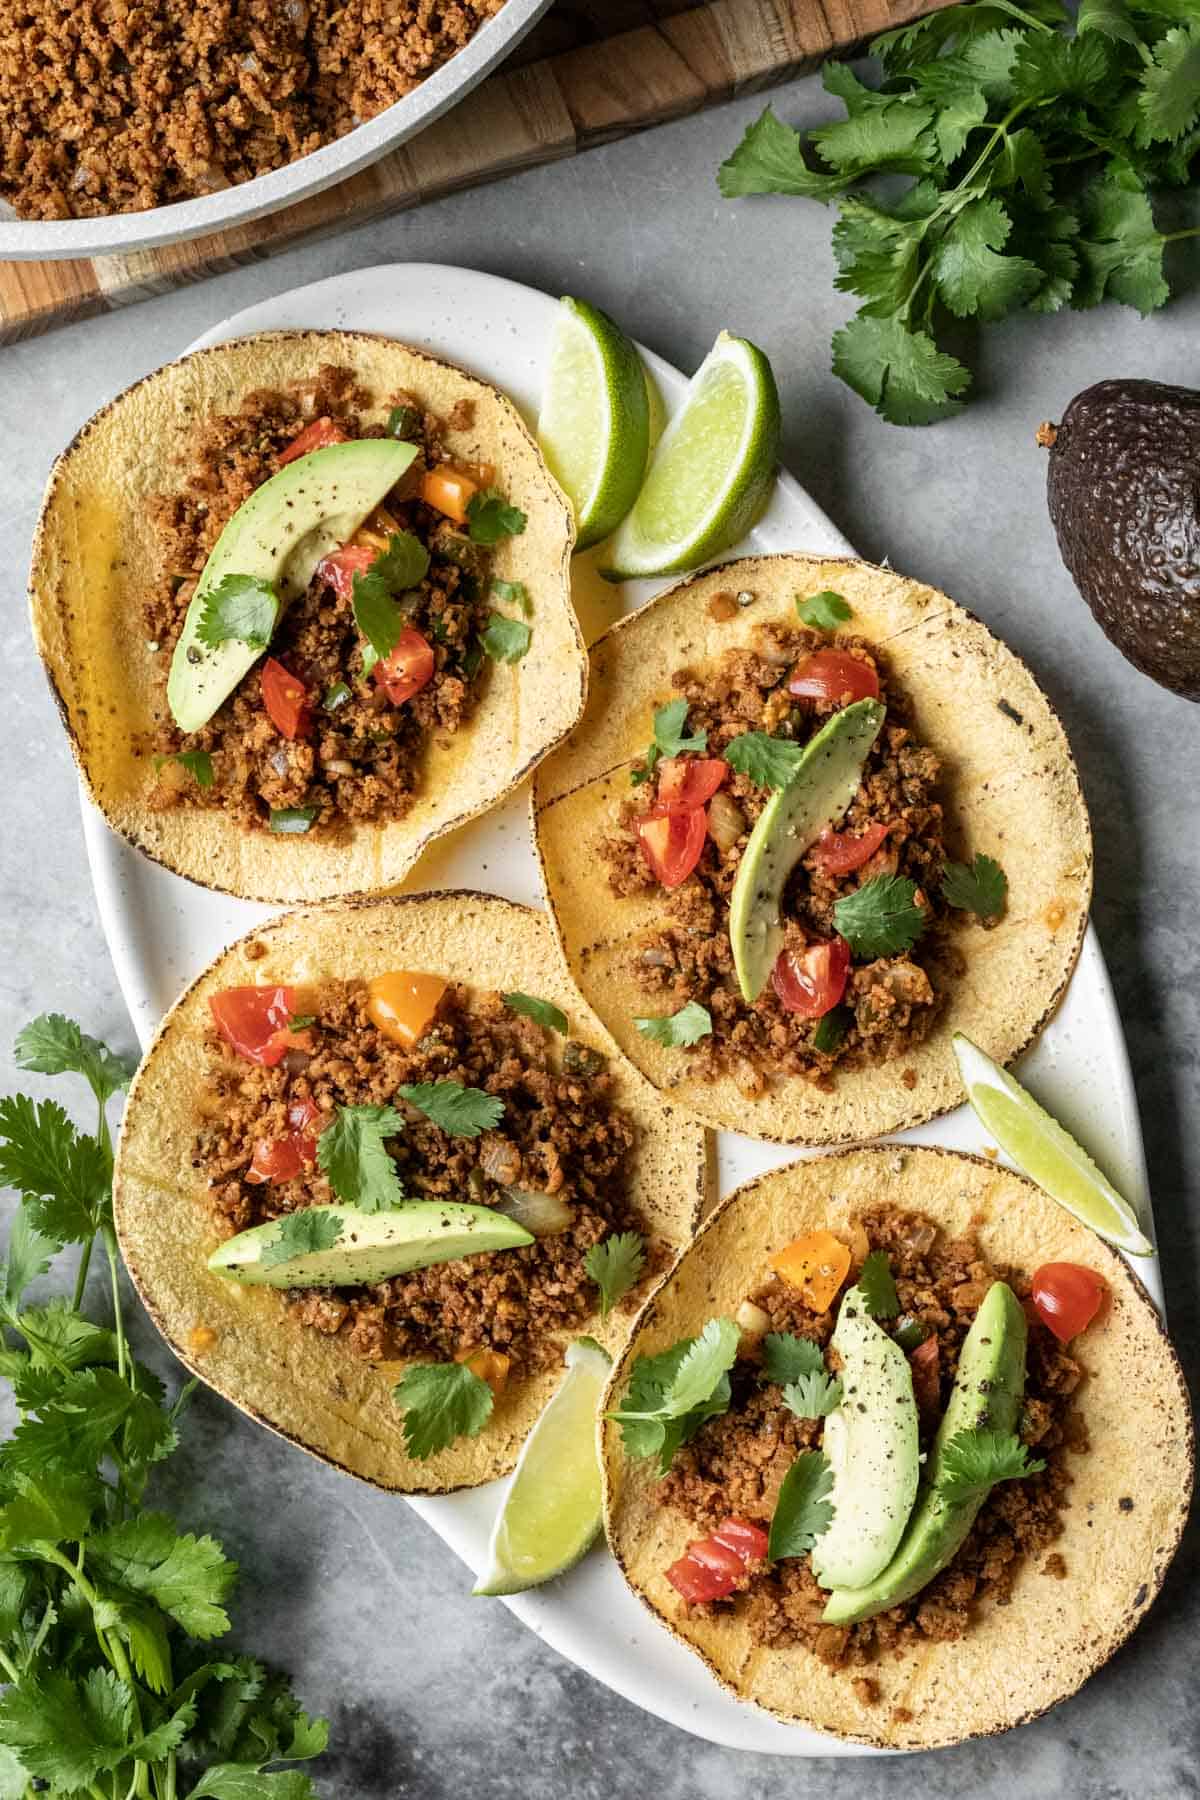 a platter with four vegan tacos made with TVP, corn tortillas, and topped with avocado.